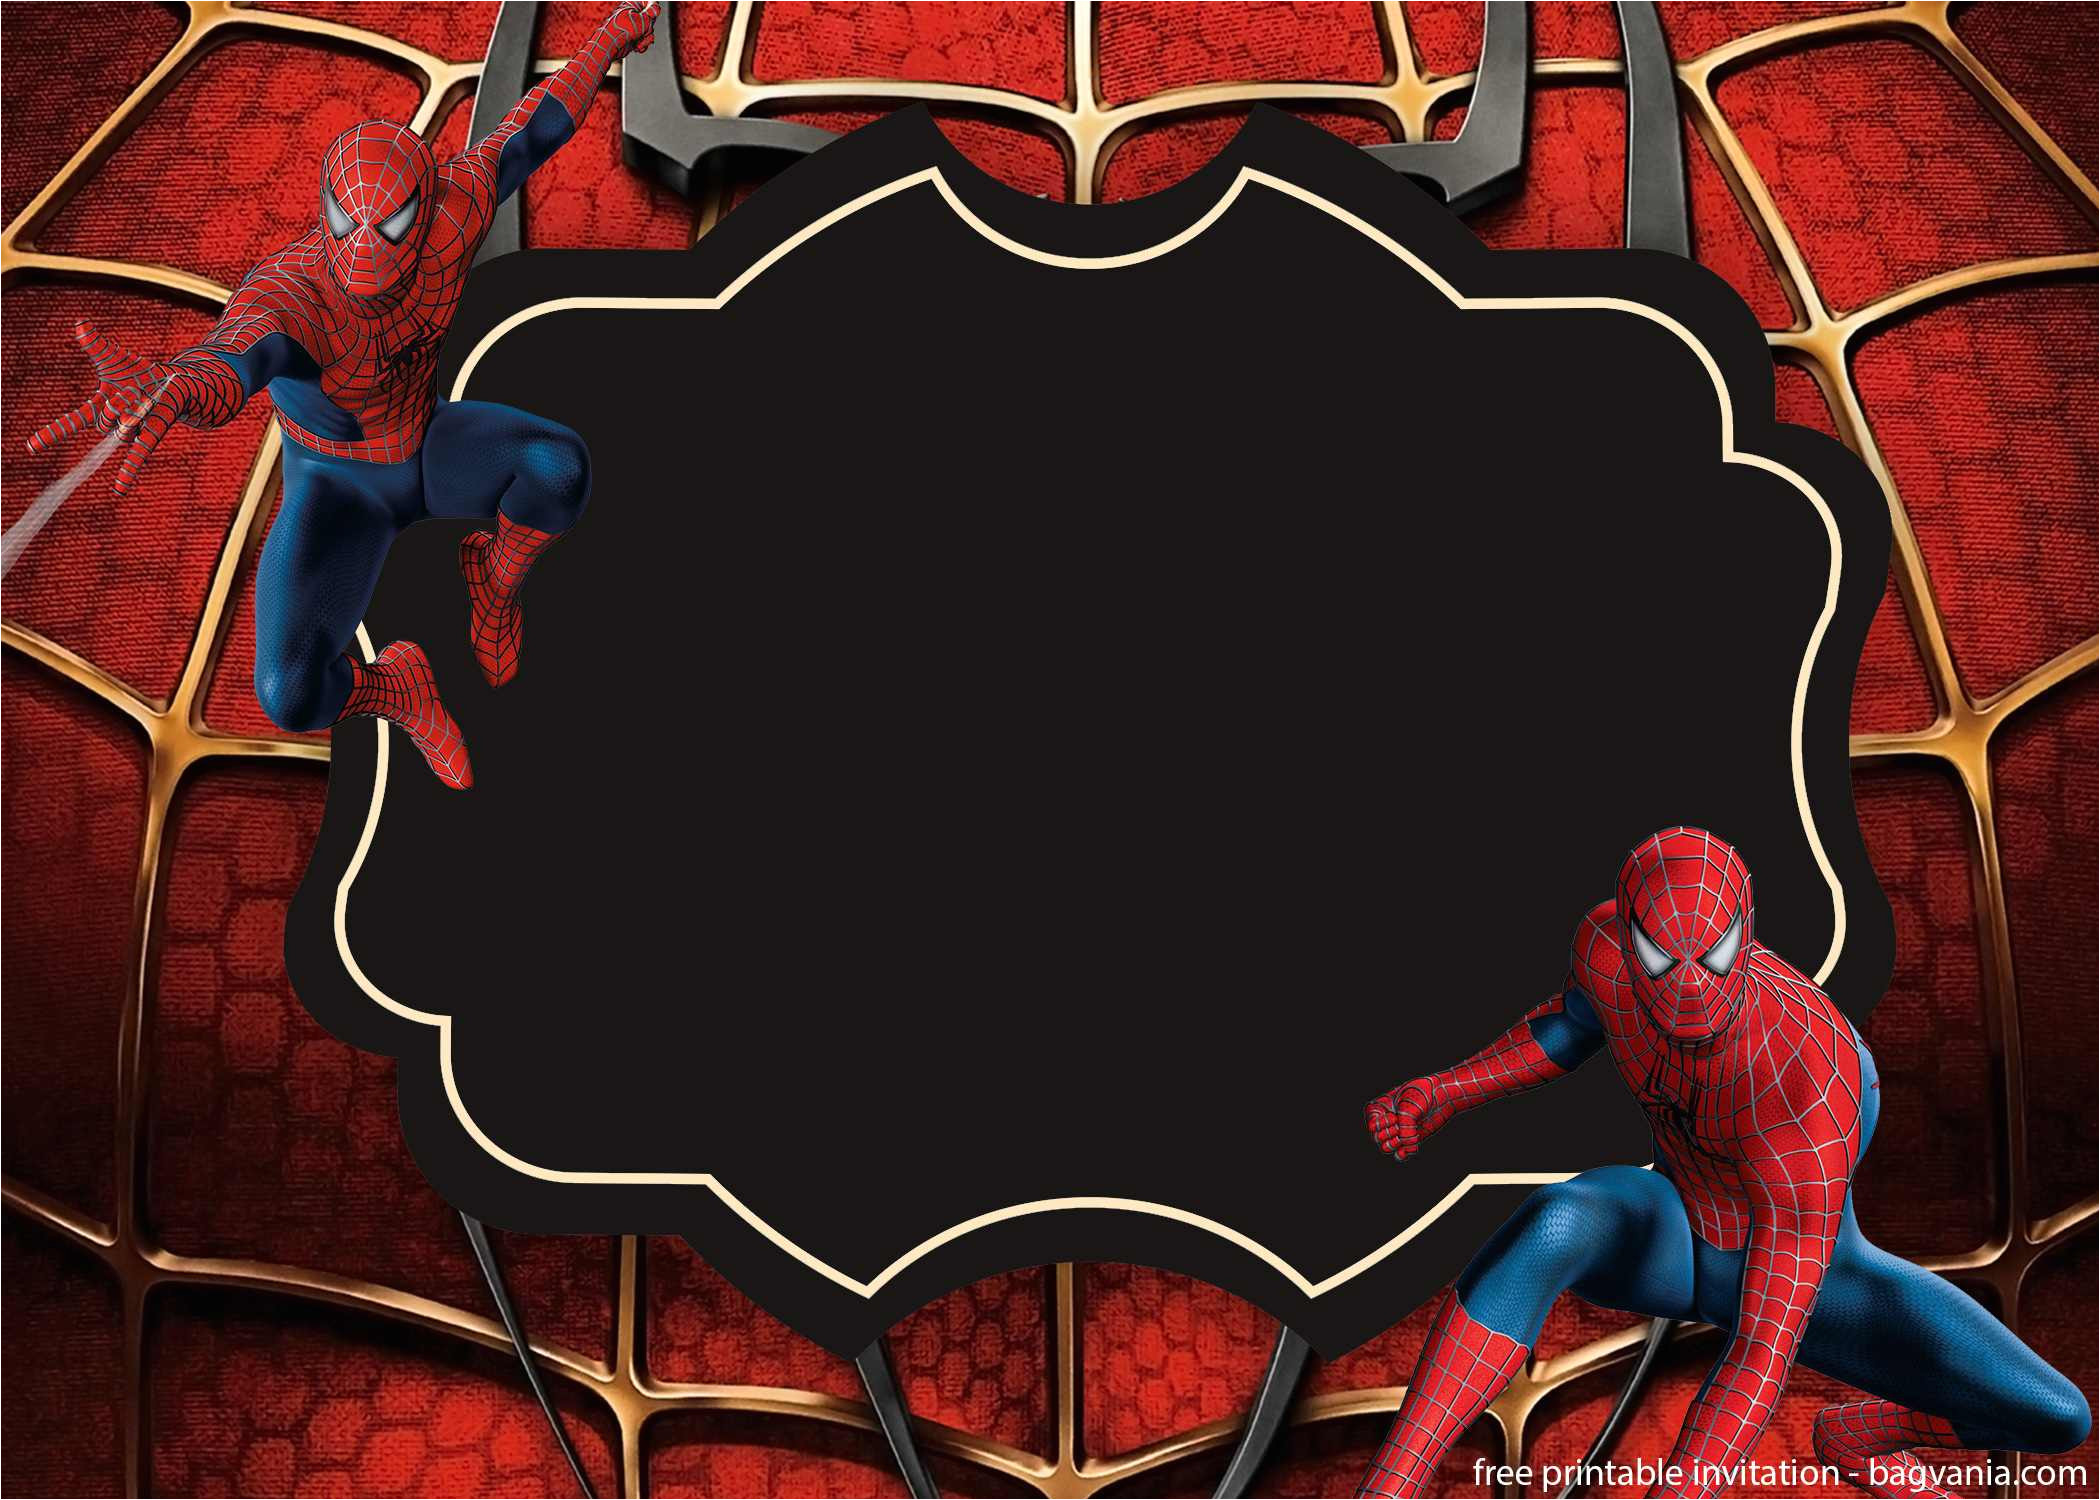 make your boys happy with spiderman invitations templates